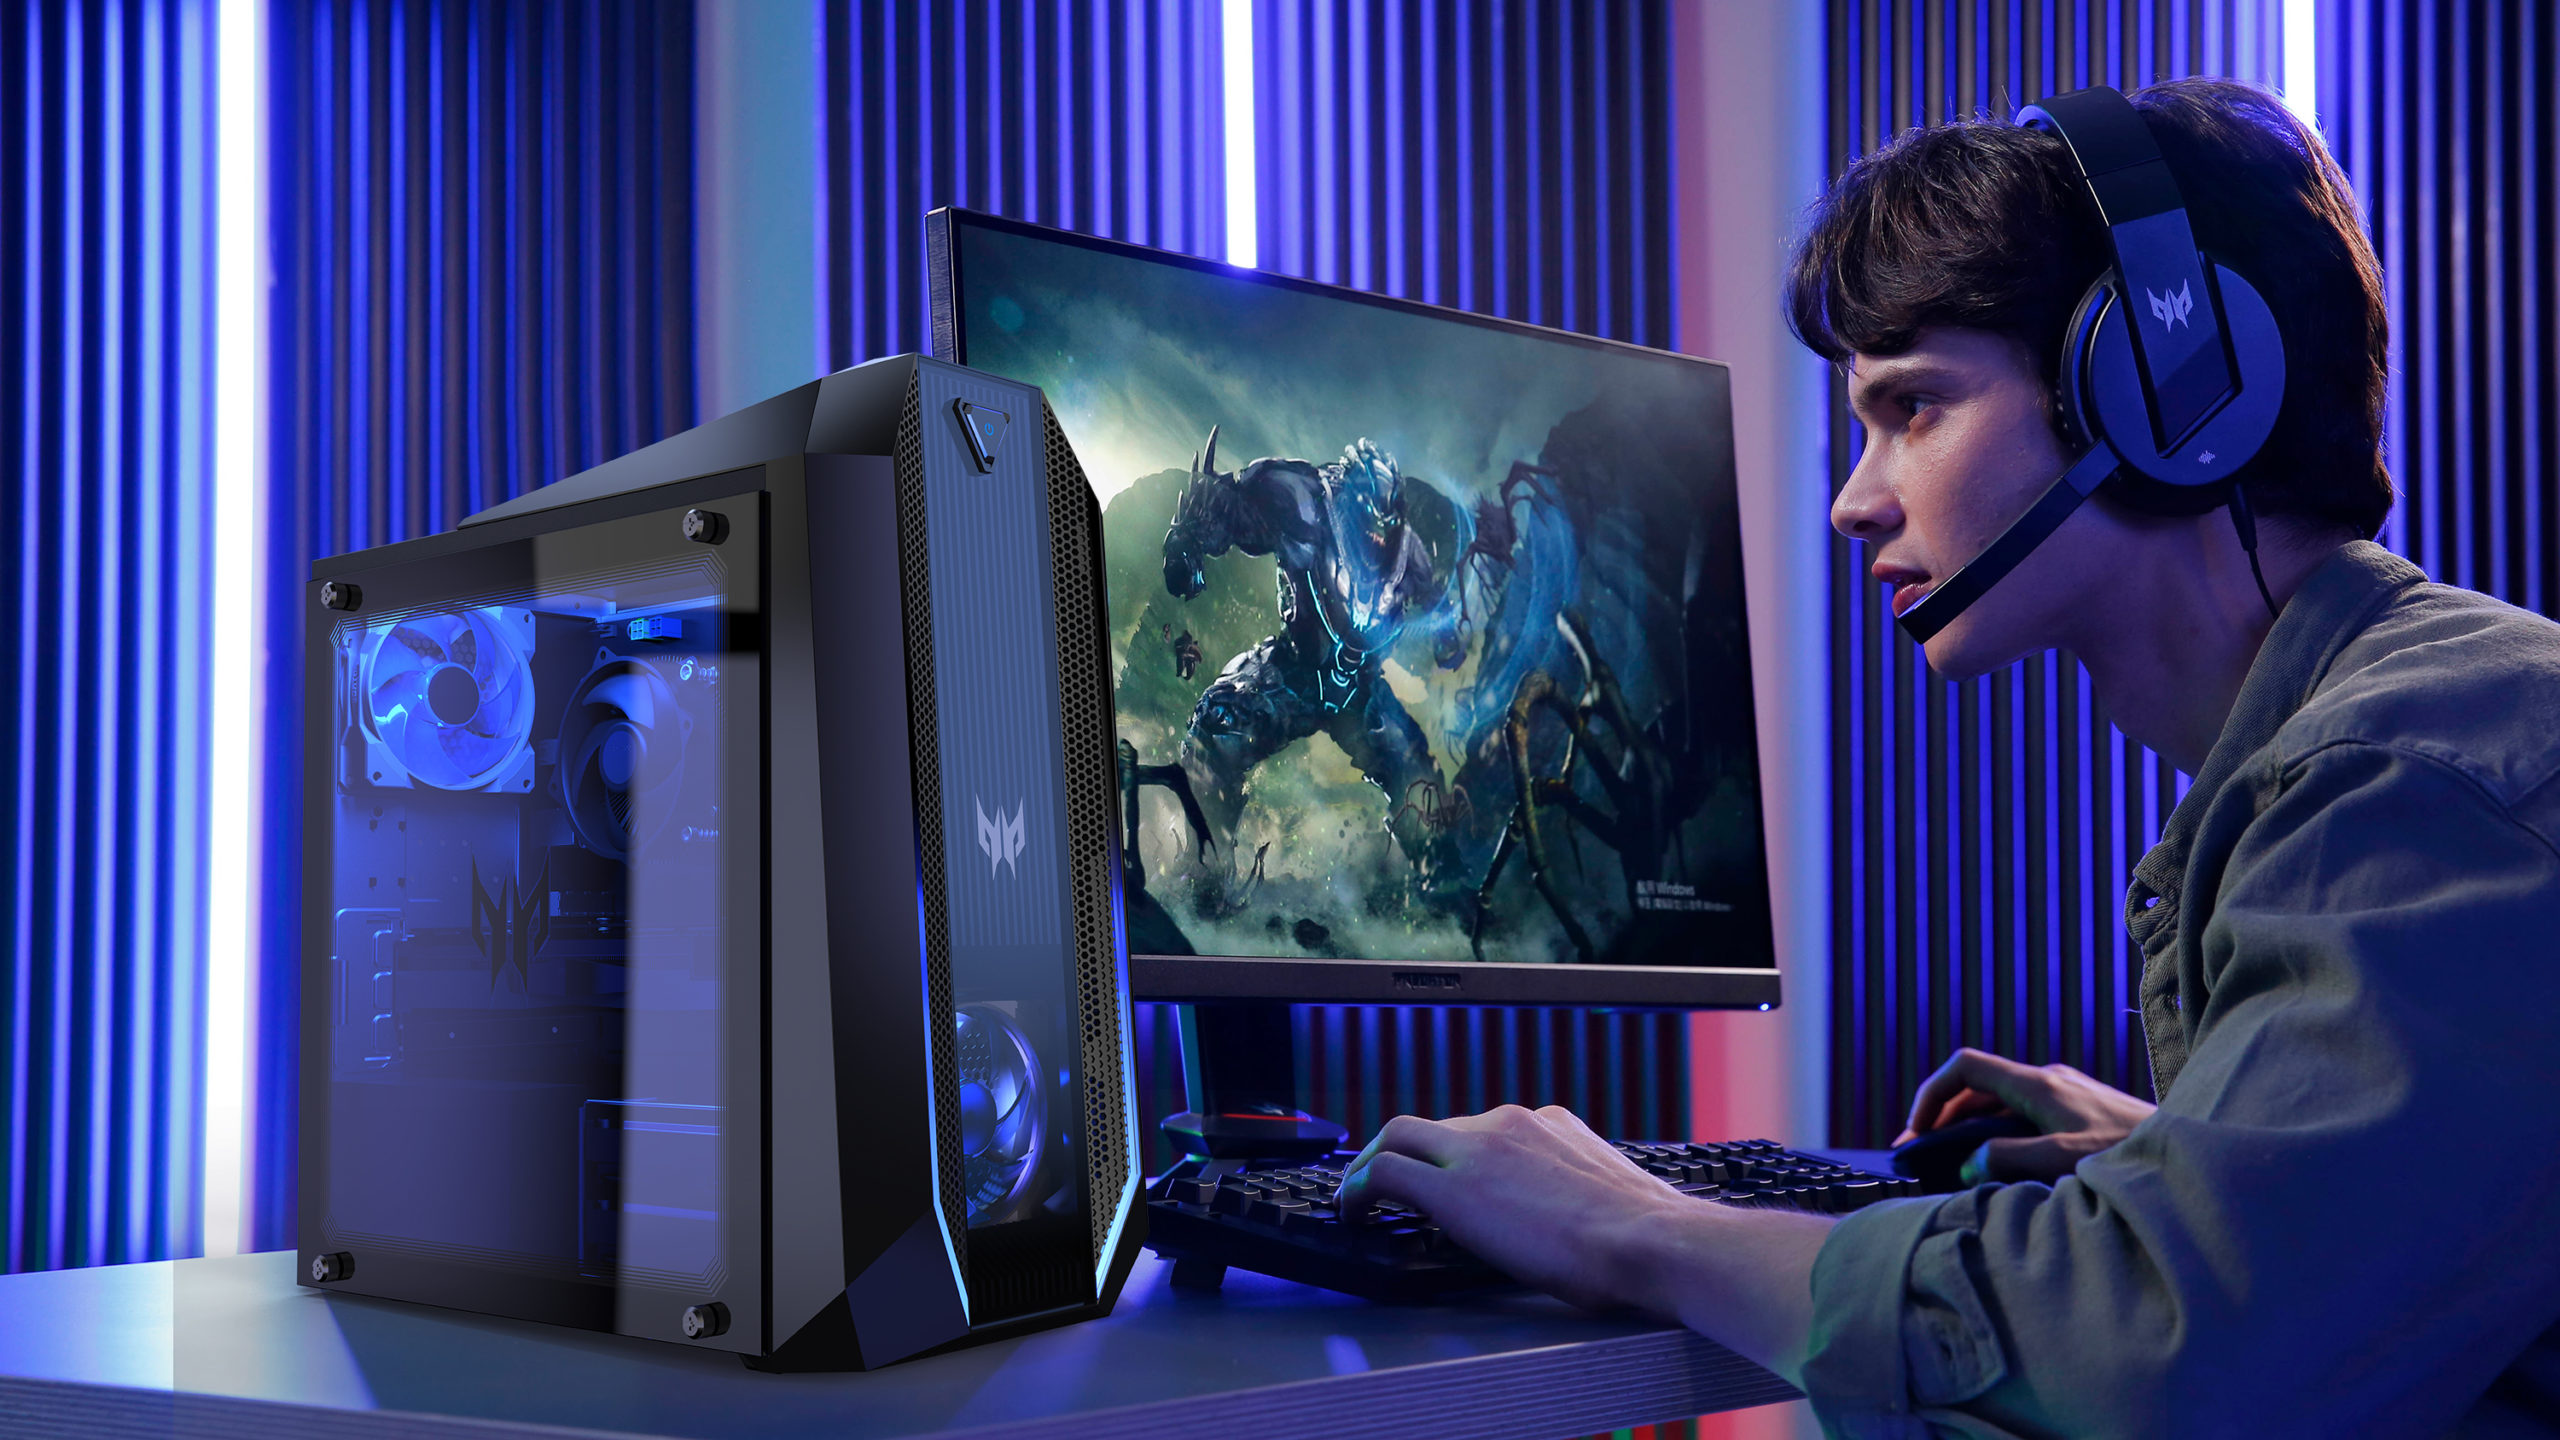 Young man playing a game on Predator Orion 3000, wearing headphones